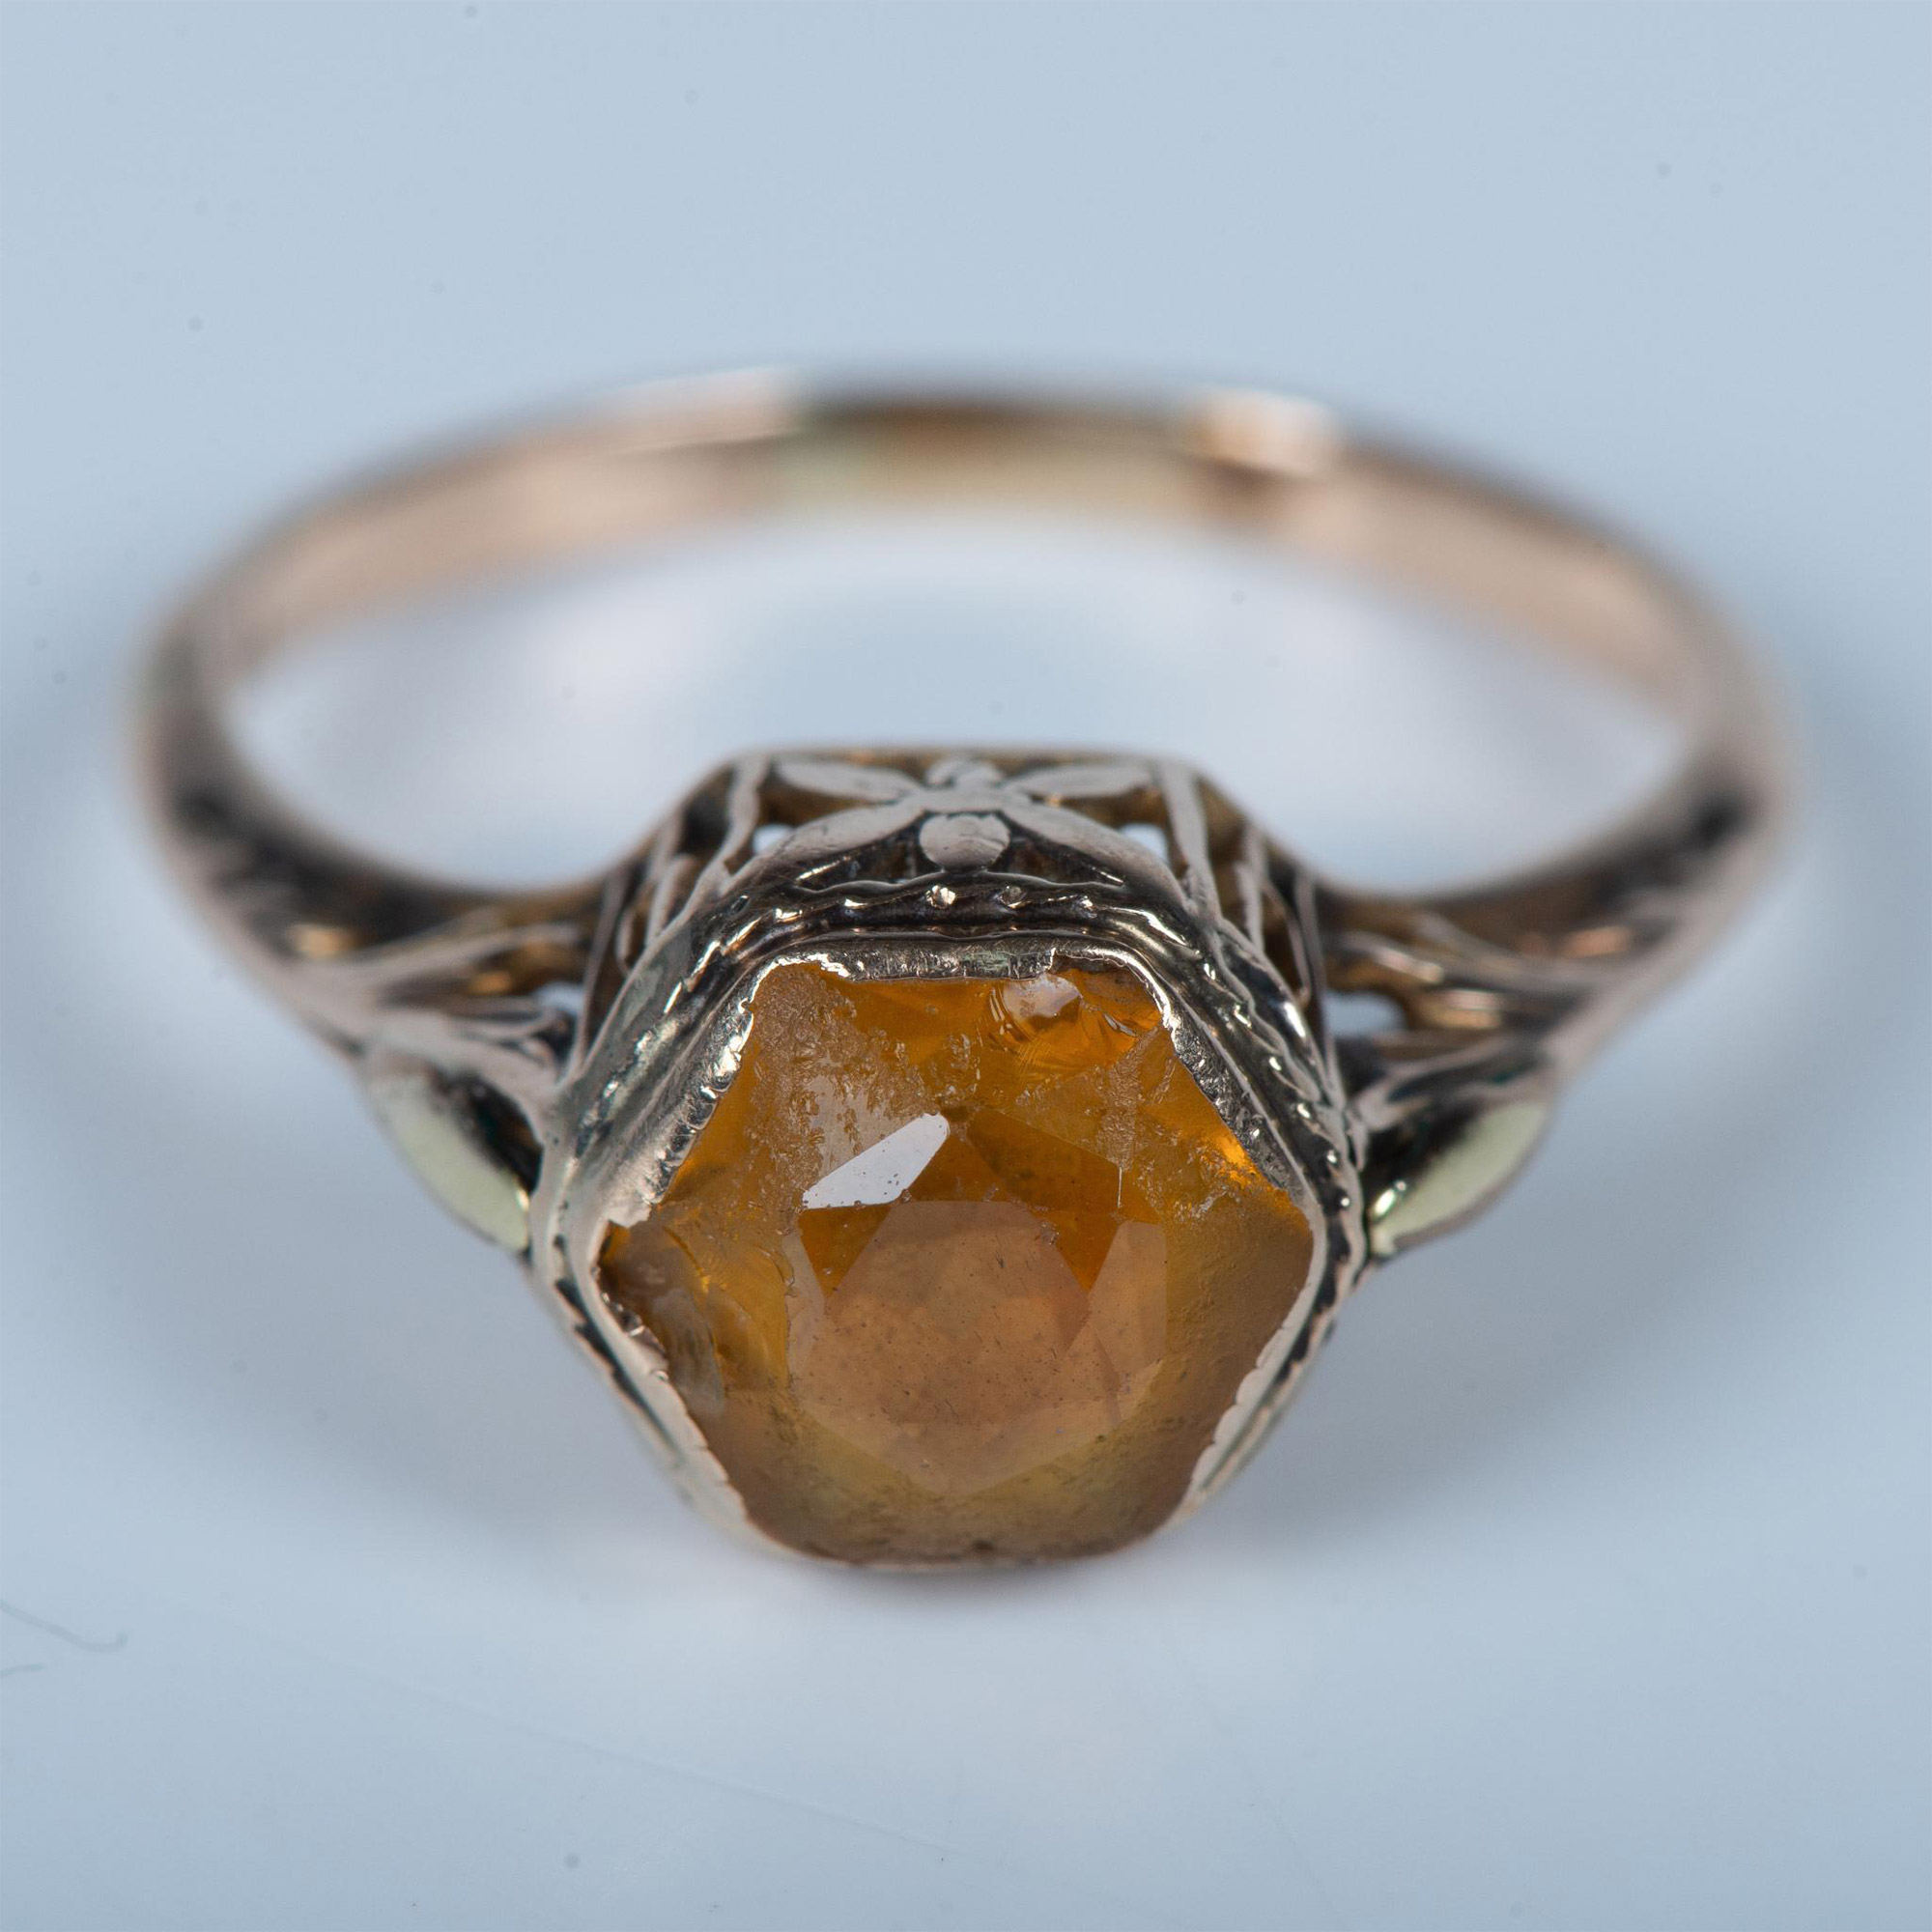 Vintage 10K Yellow Gold & Citrine Ring - Image 2 of 5